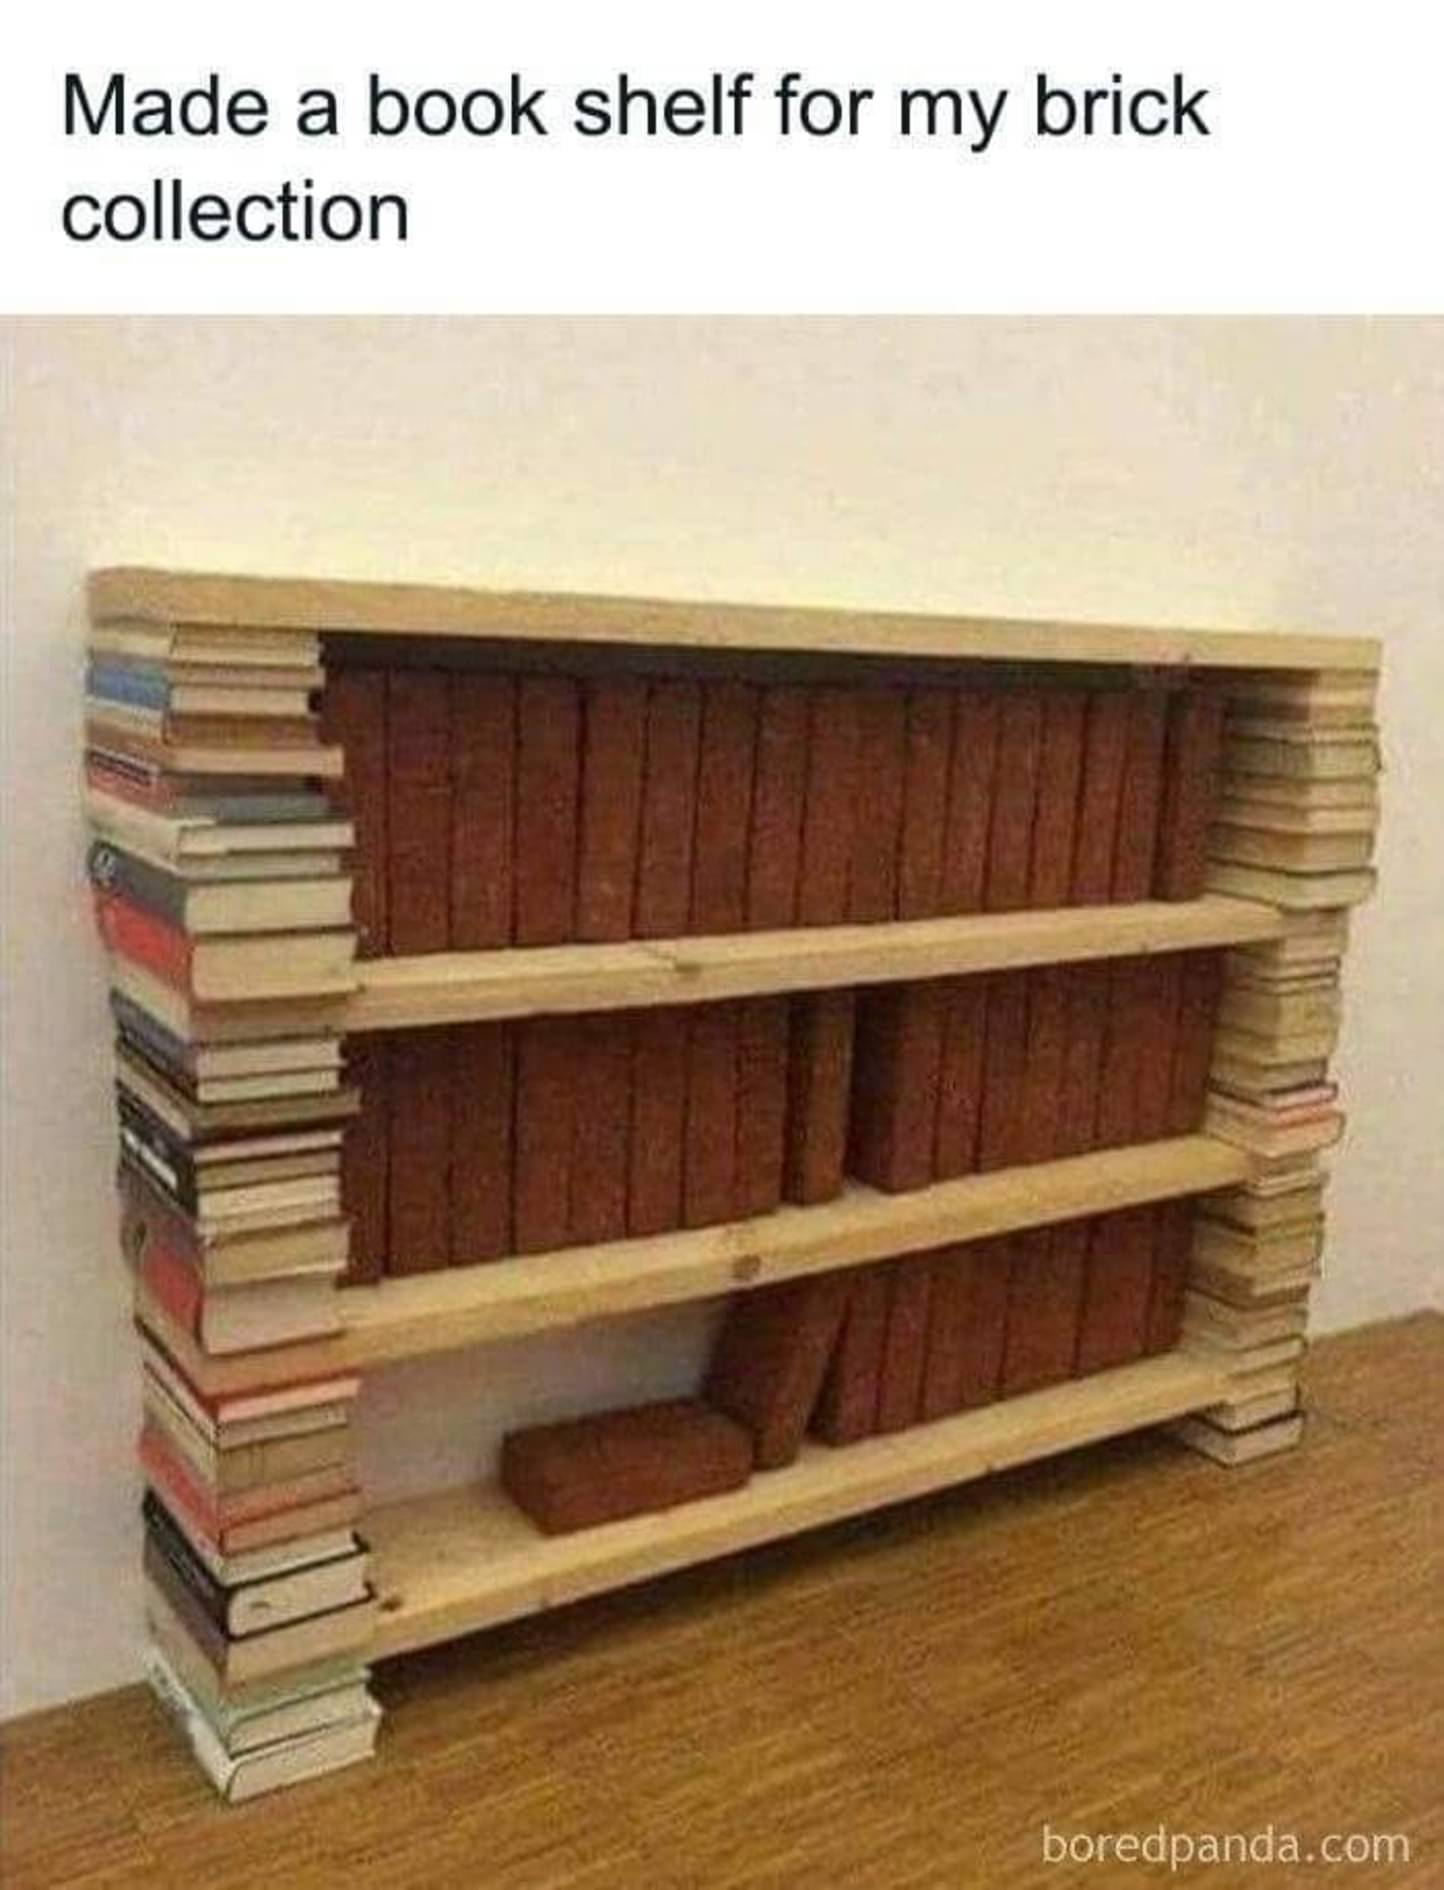 book_shelf_for_my_brick_collection.jpg